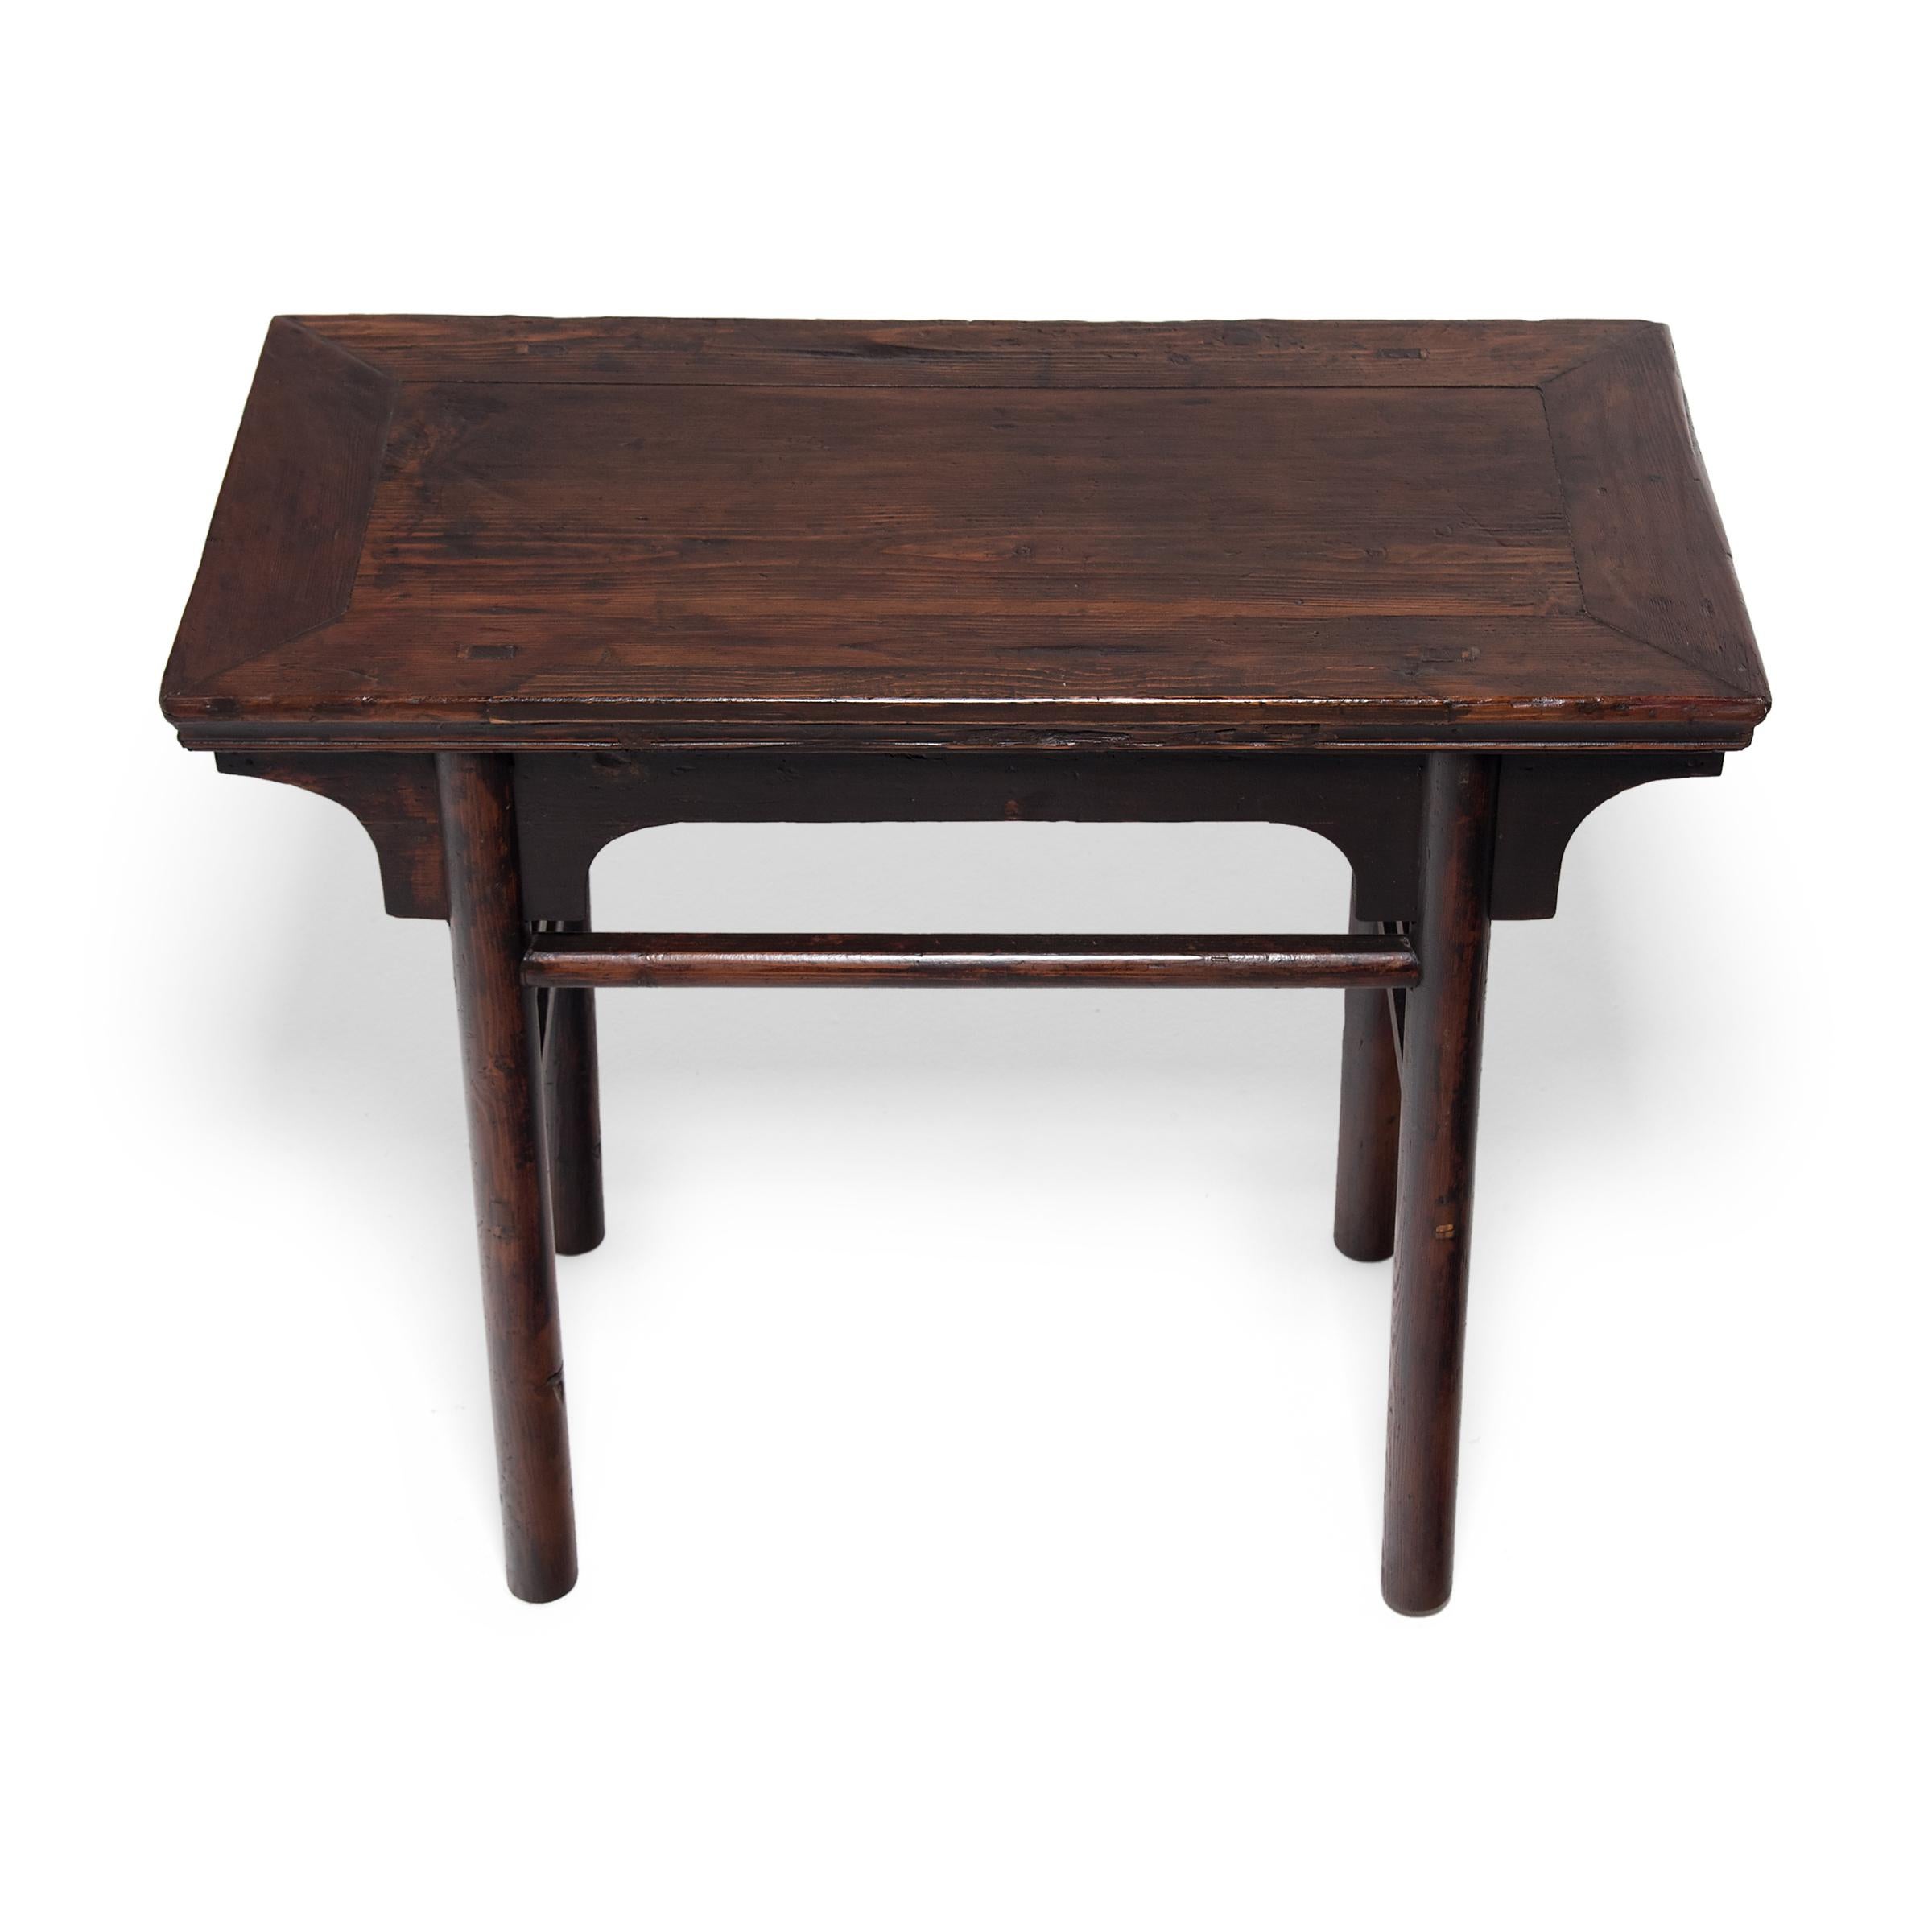 20th Century Chinese Wine Table with Straight Stretchers, c. 1900